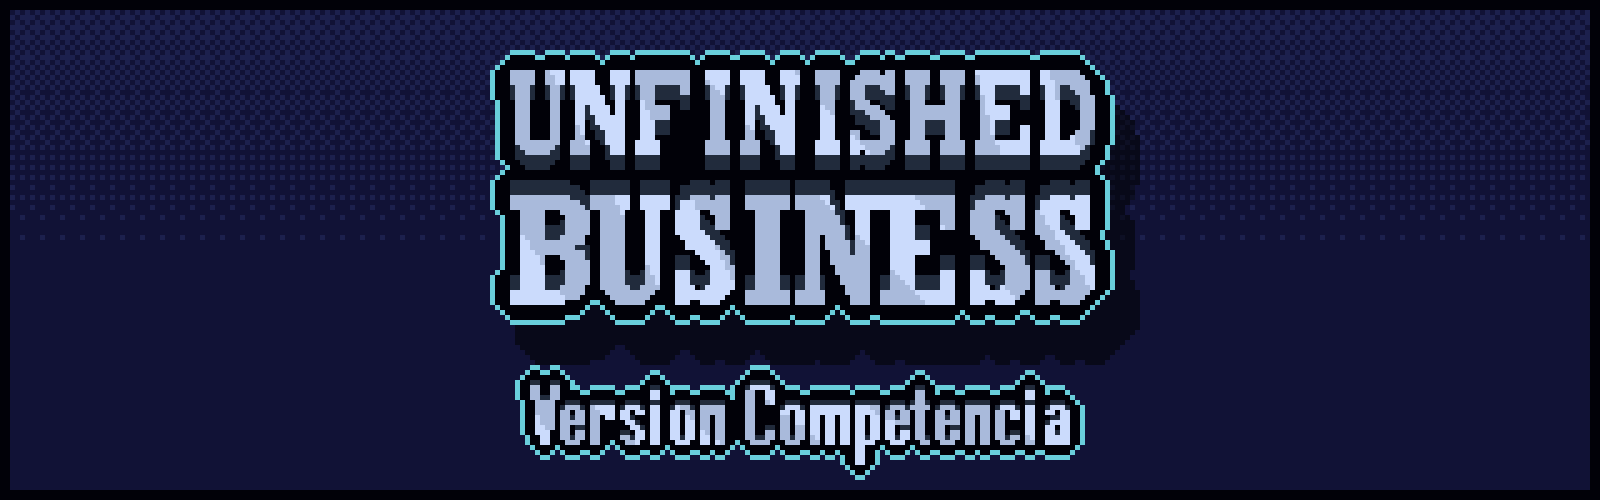 Unfinished Business - Version Competencia